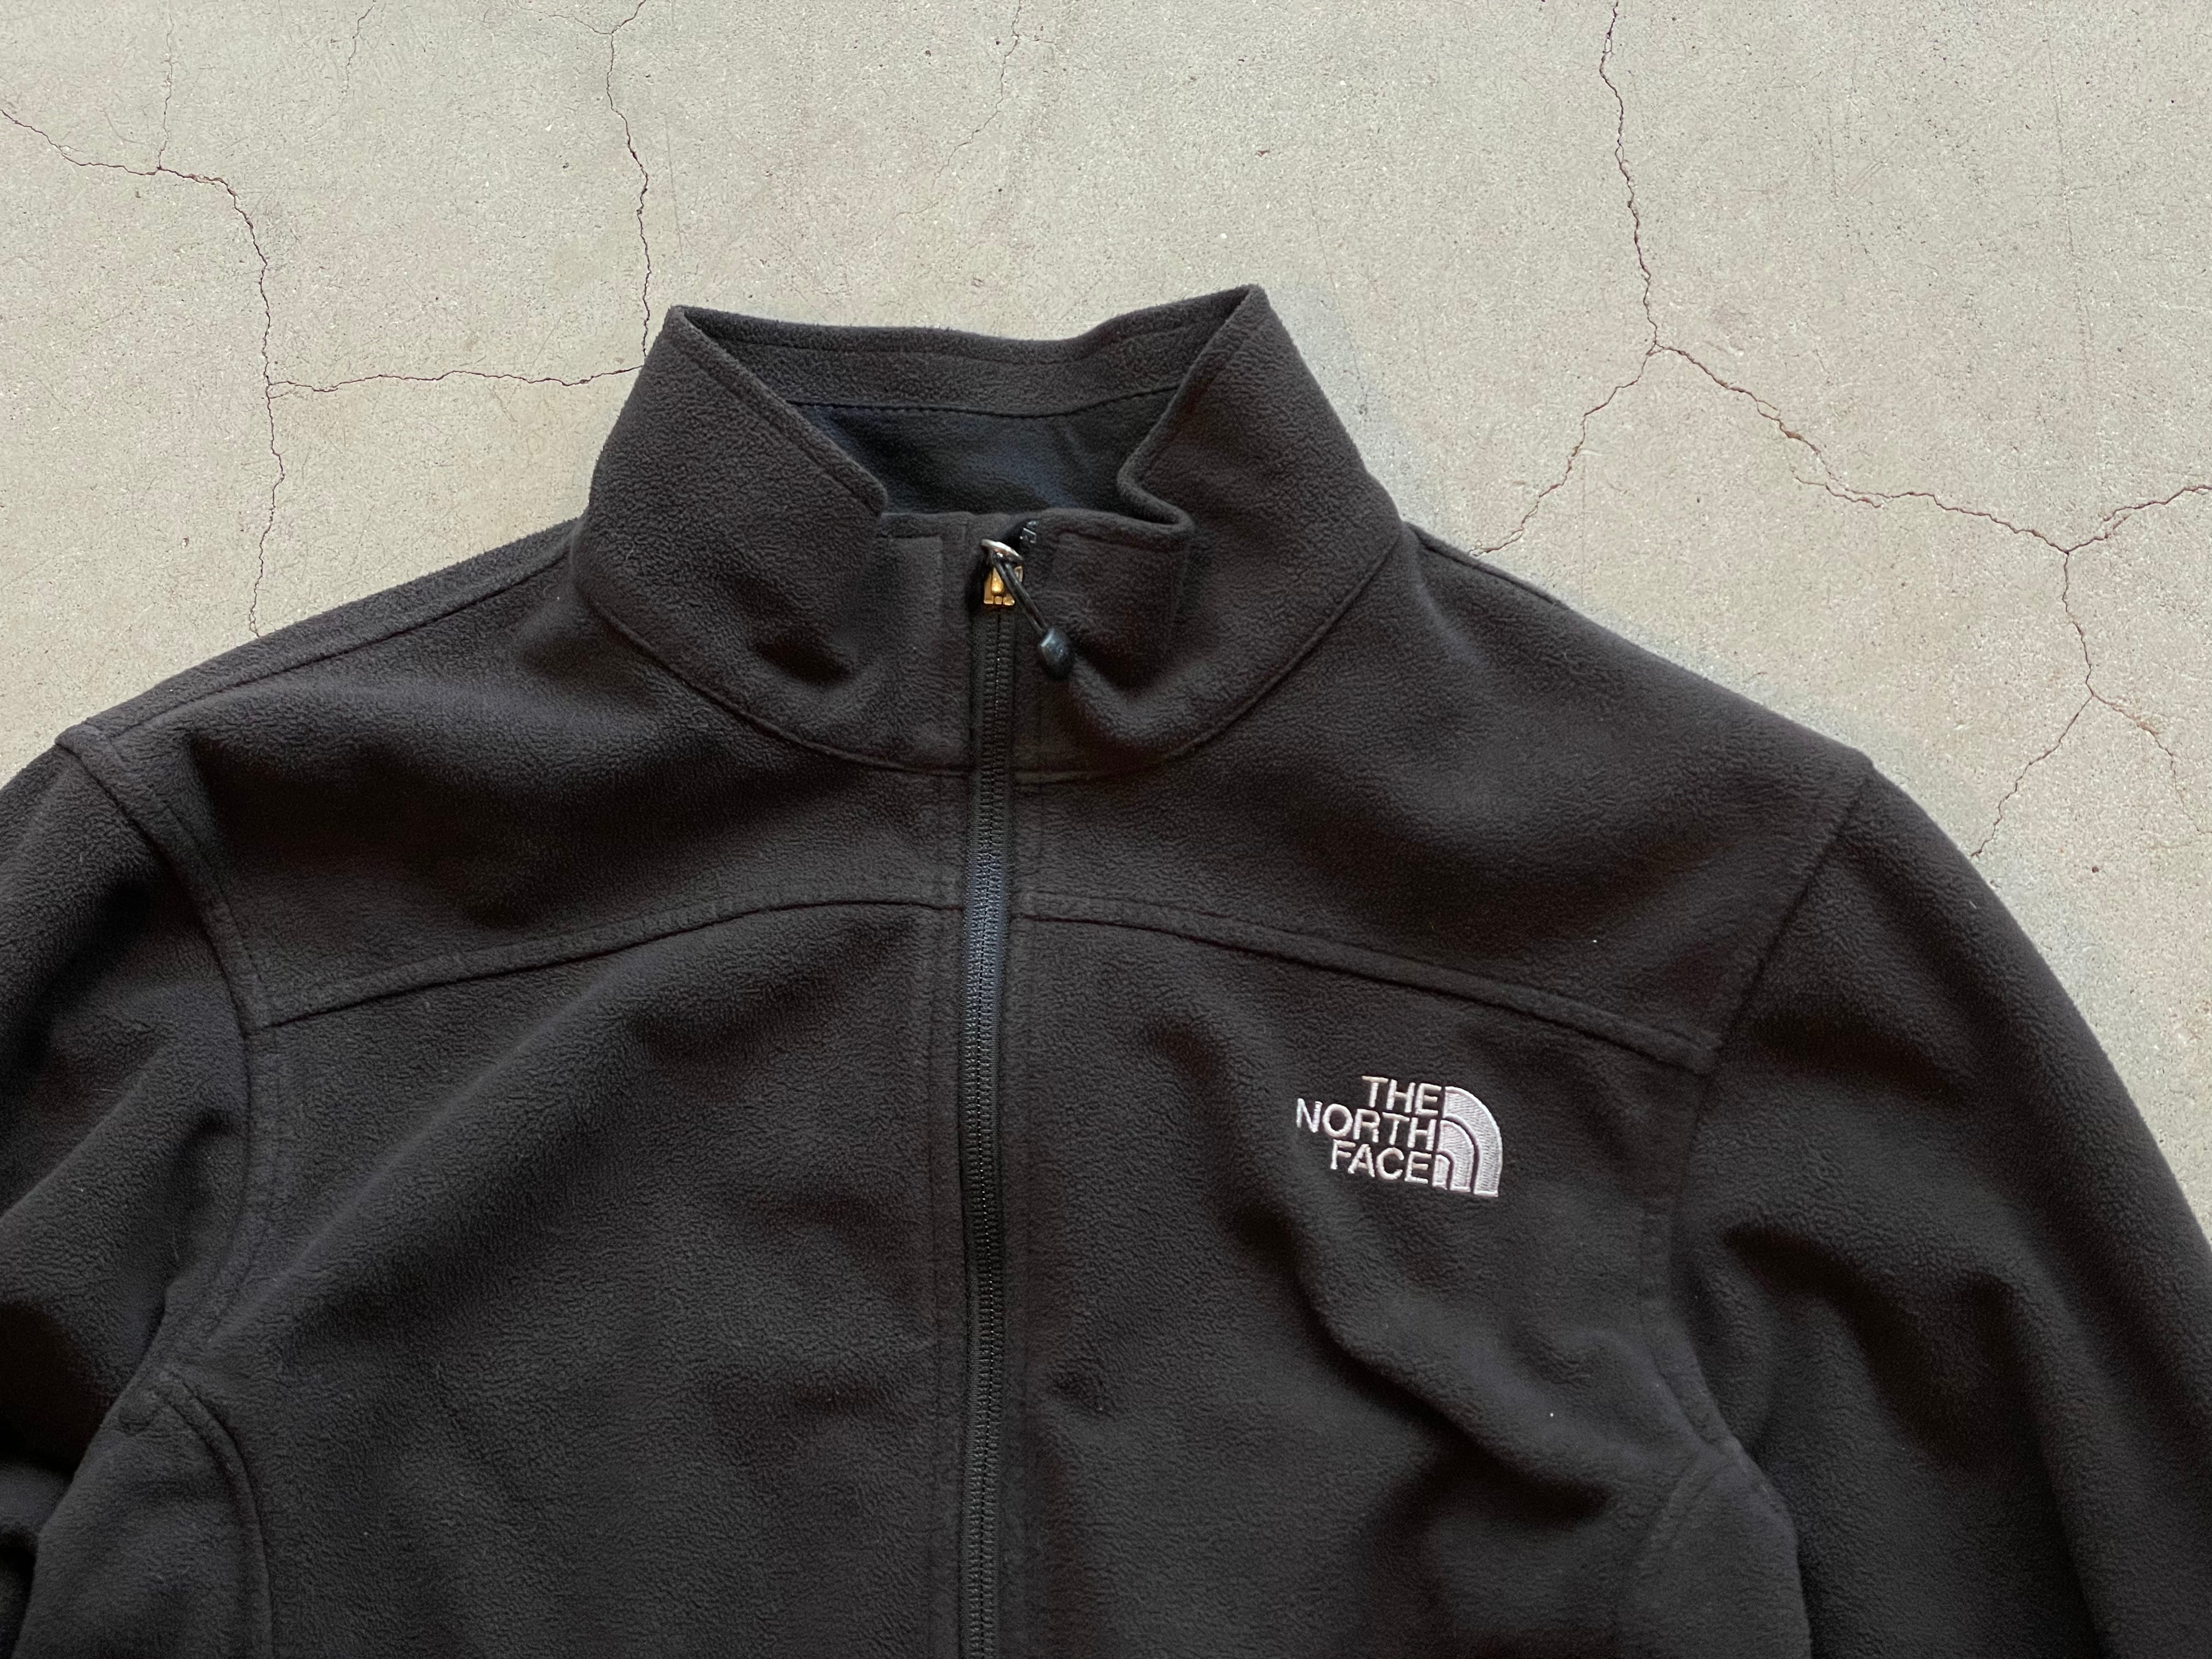 THE NORTH FACE Fleece JACKET WINDWALL col Black size S ノース